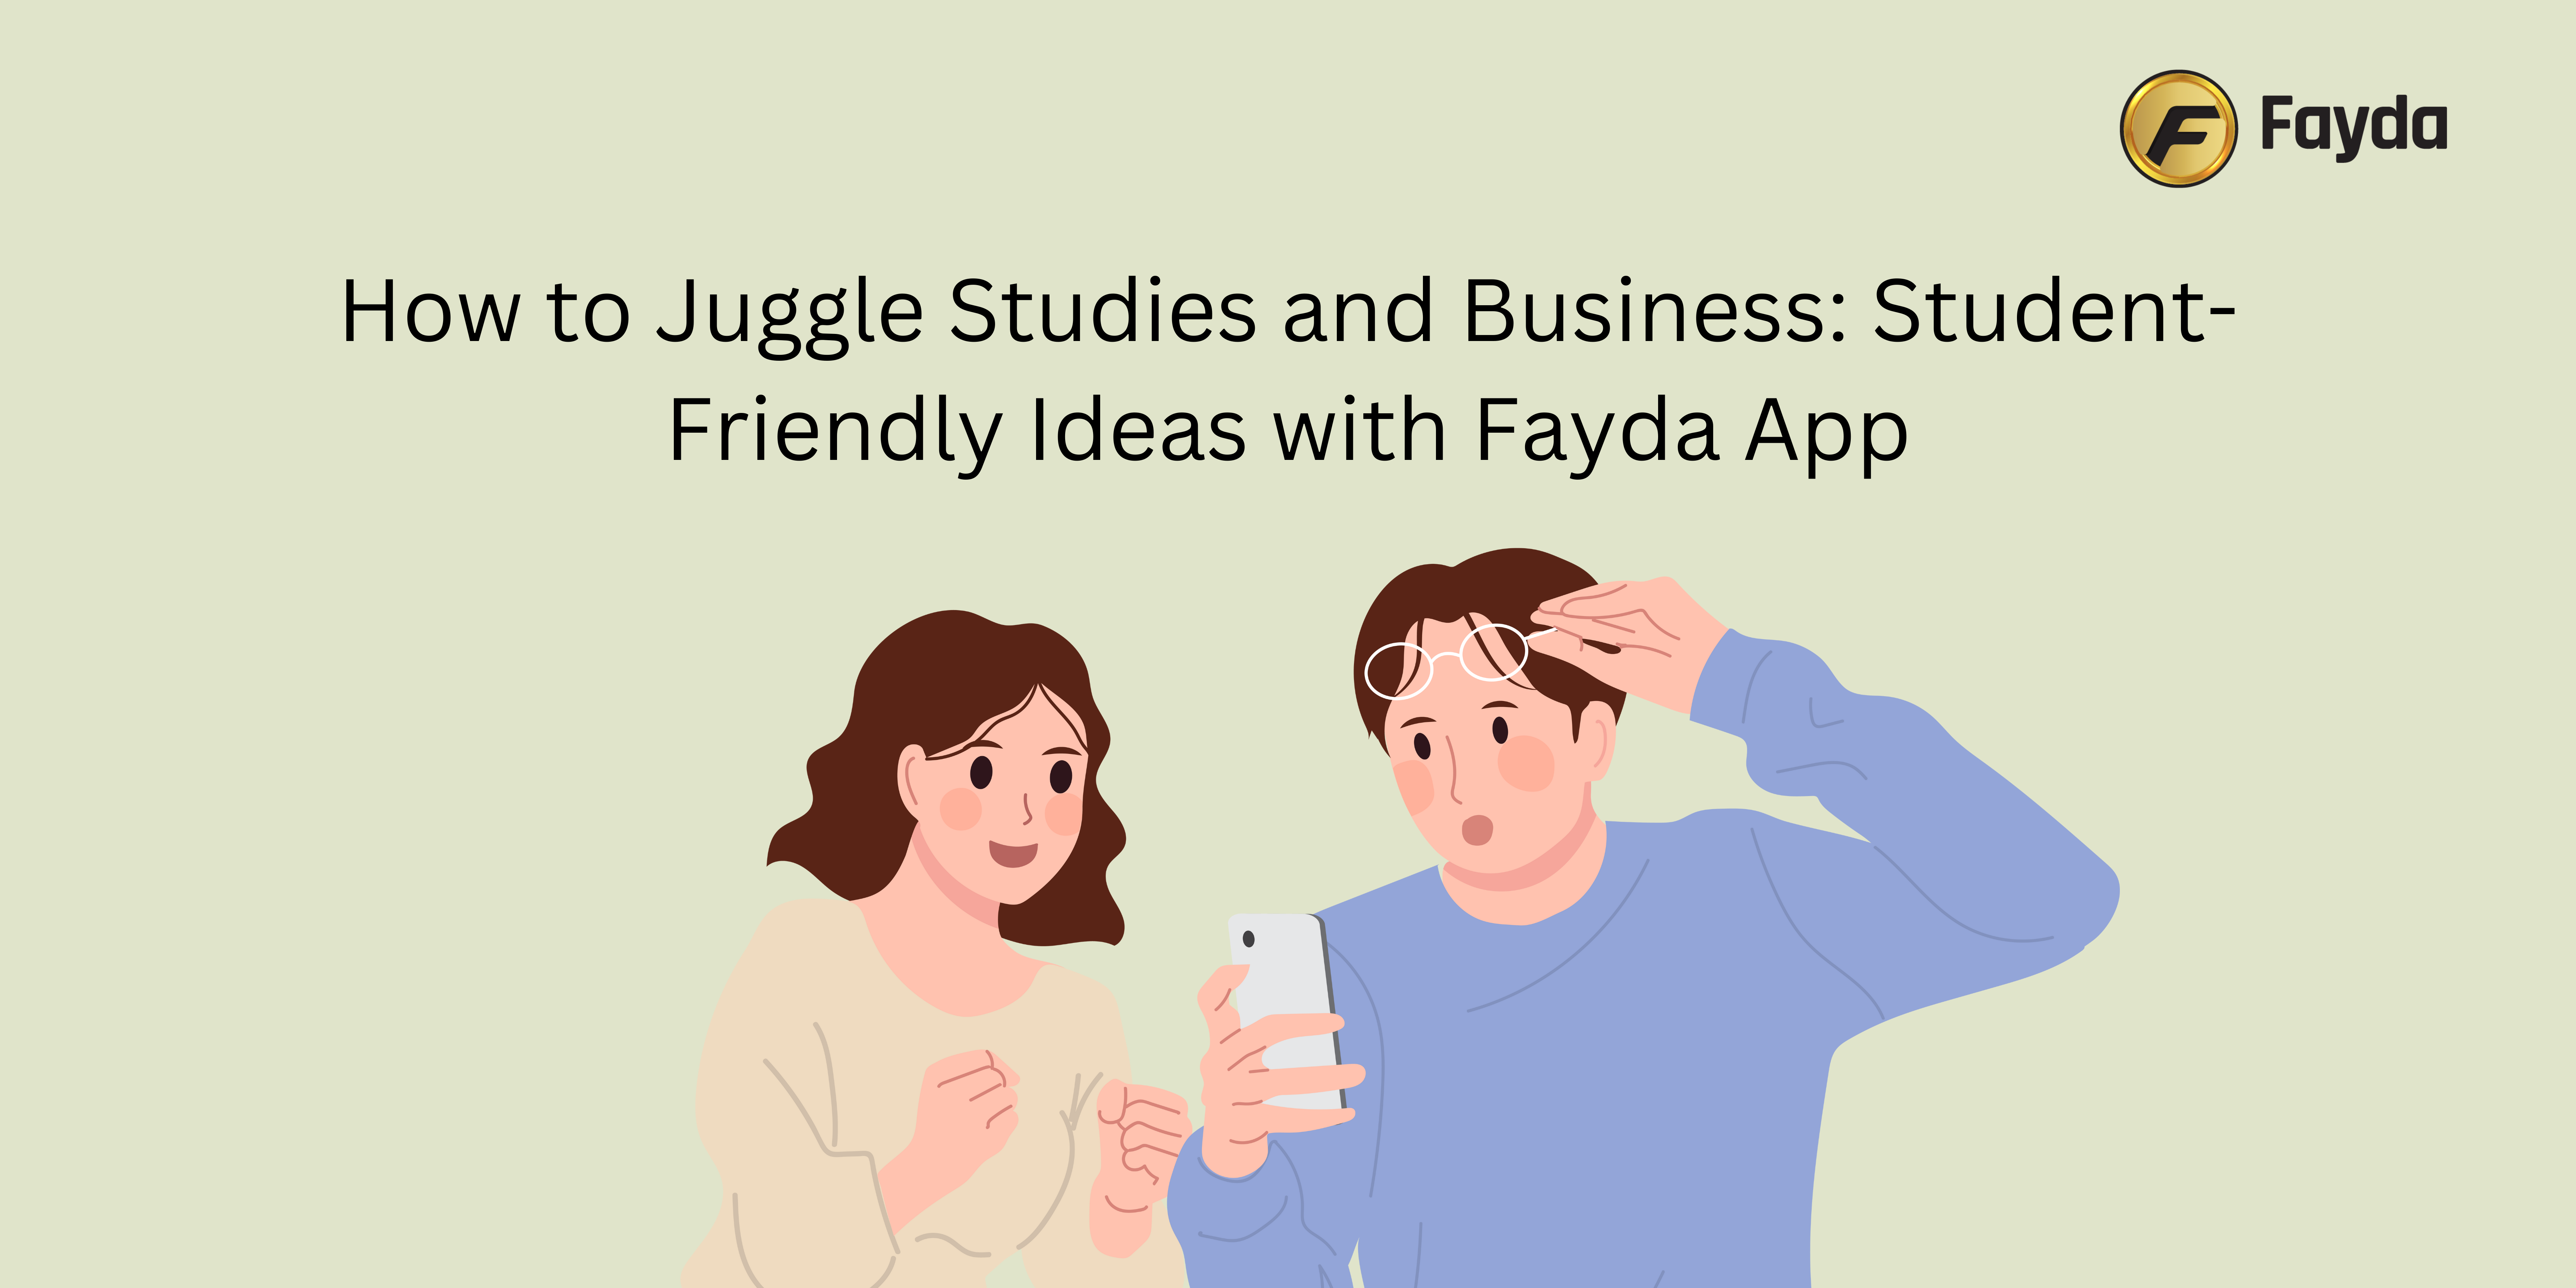 How to Juggle Studies and Business: Student-Friendly Ideas with Fayda App